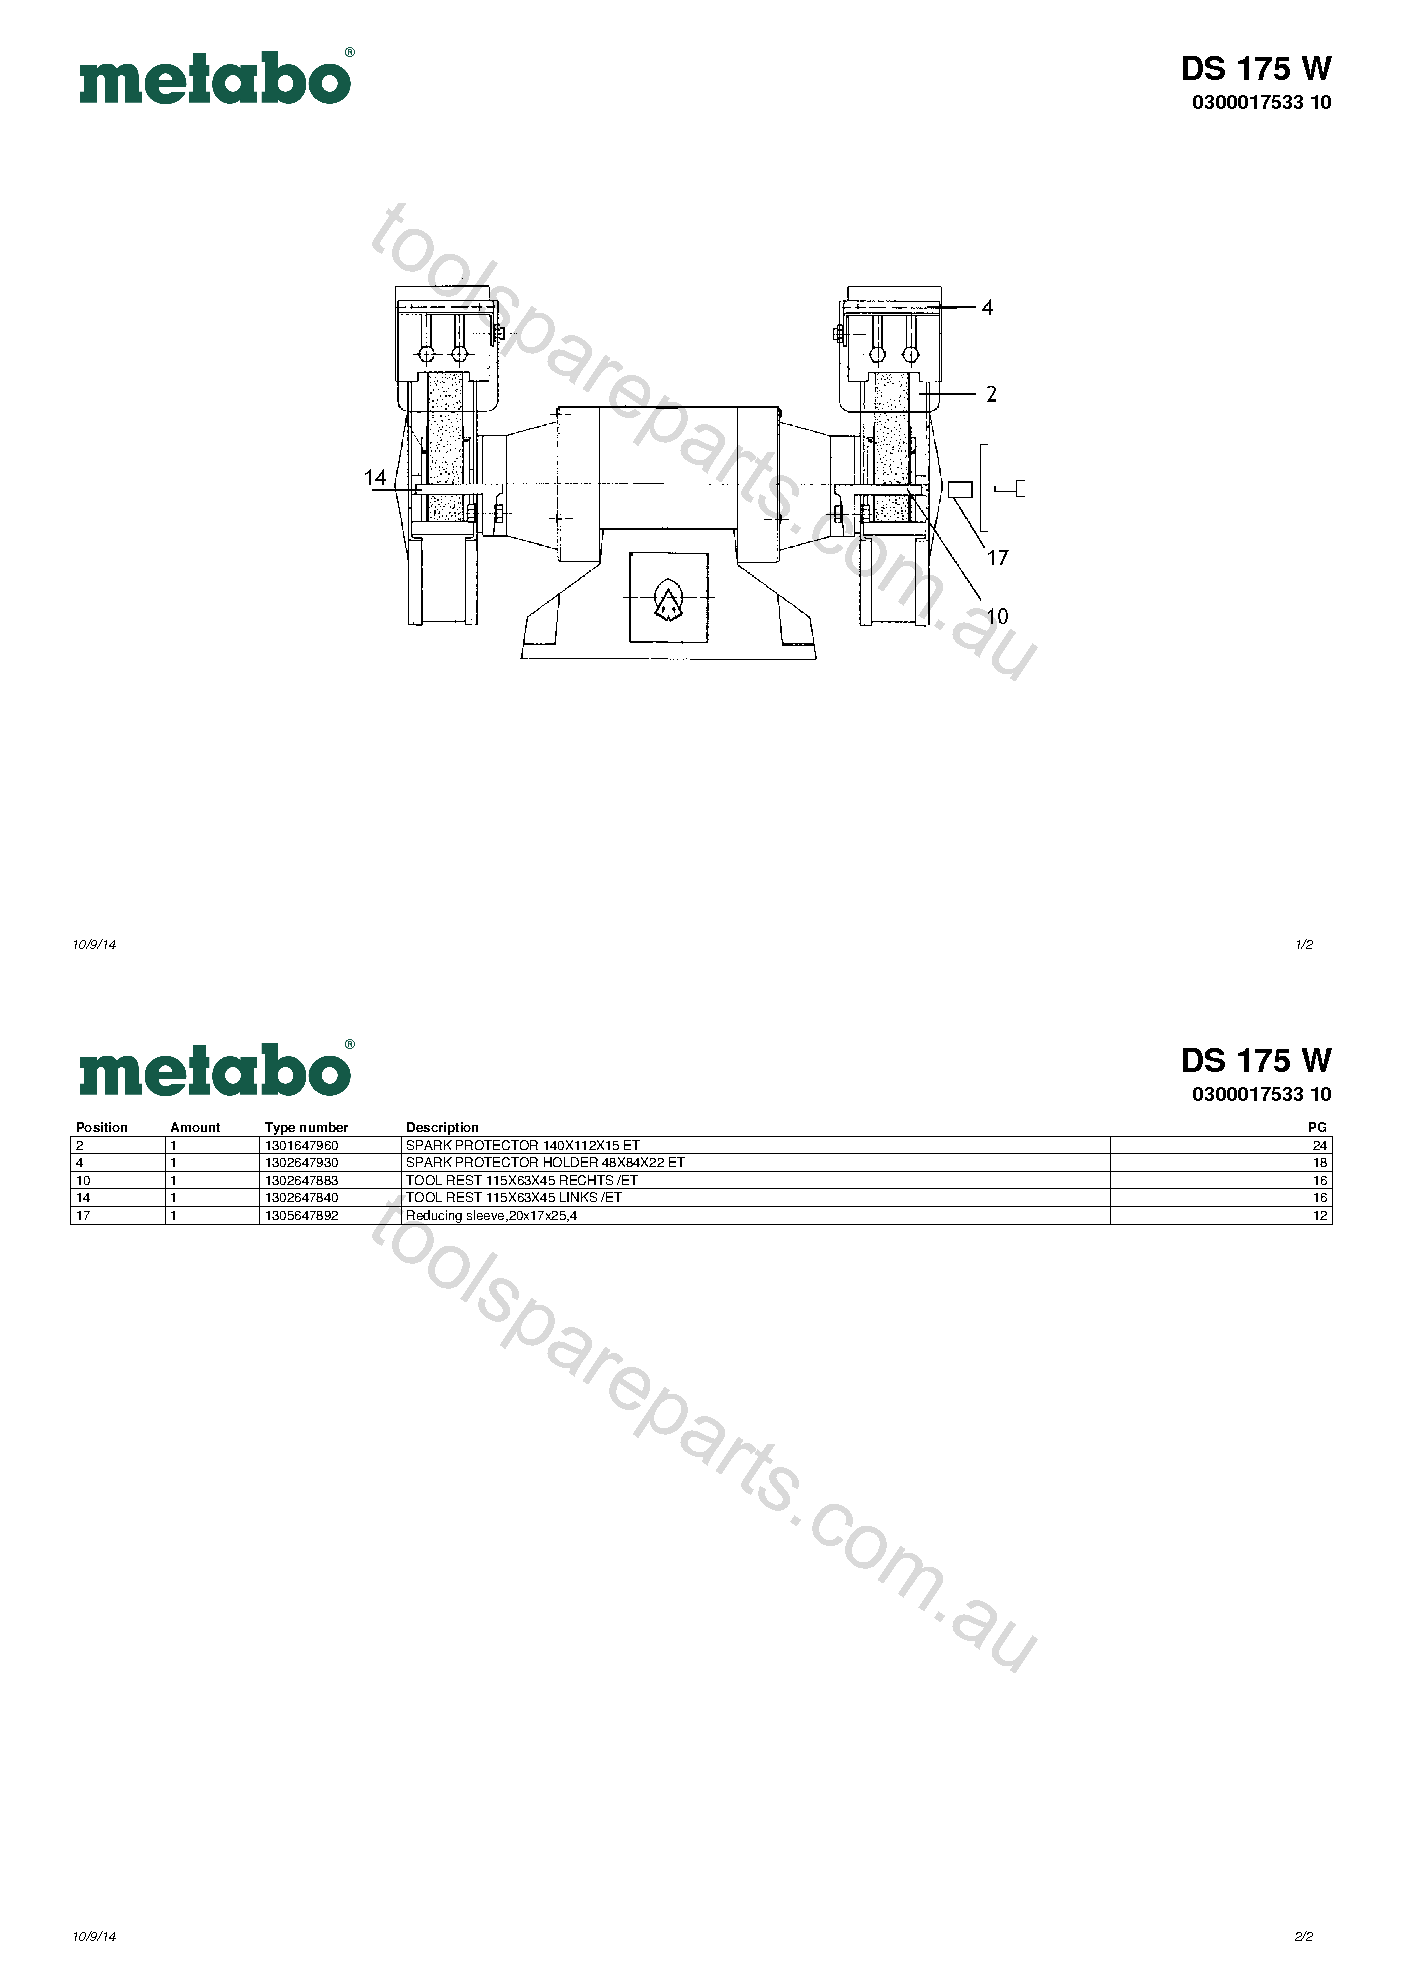 Metabo DS 175 W 0300017533 10  Diagram 1